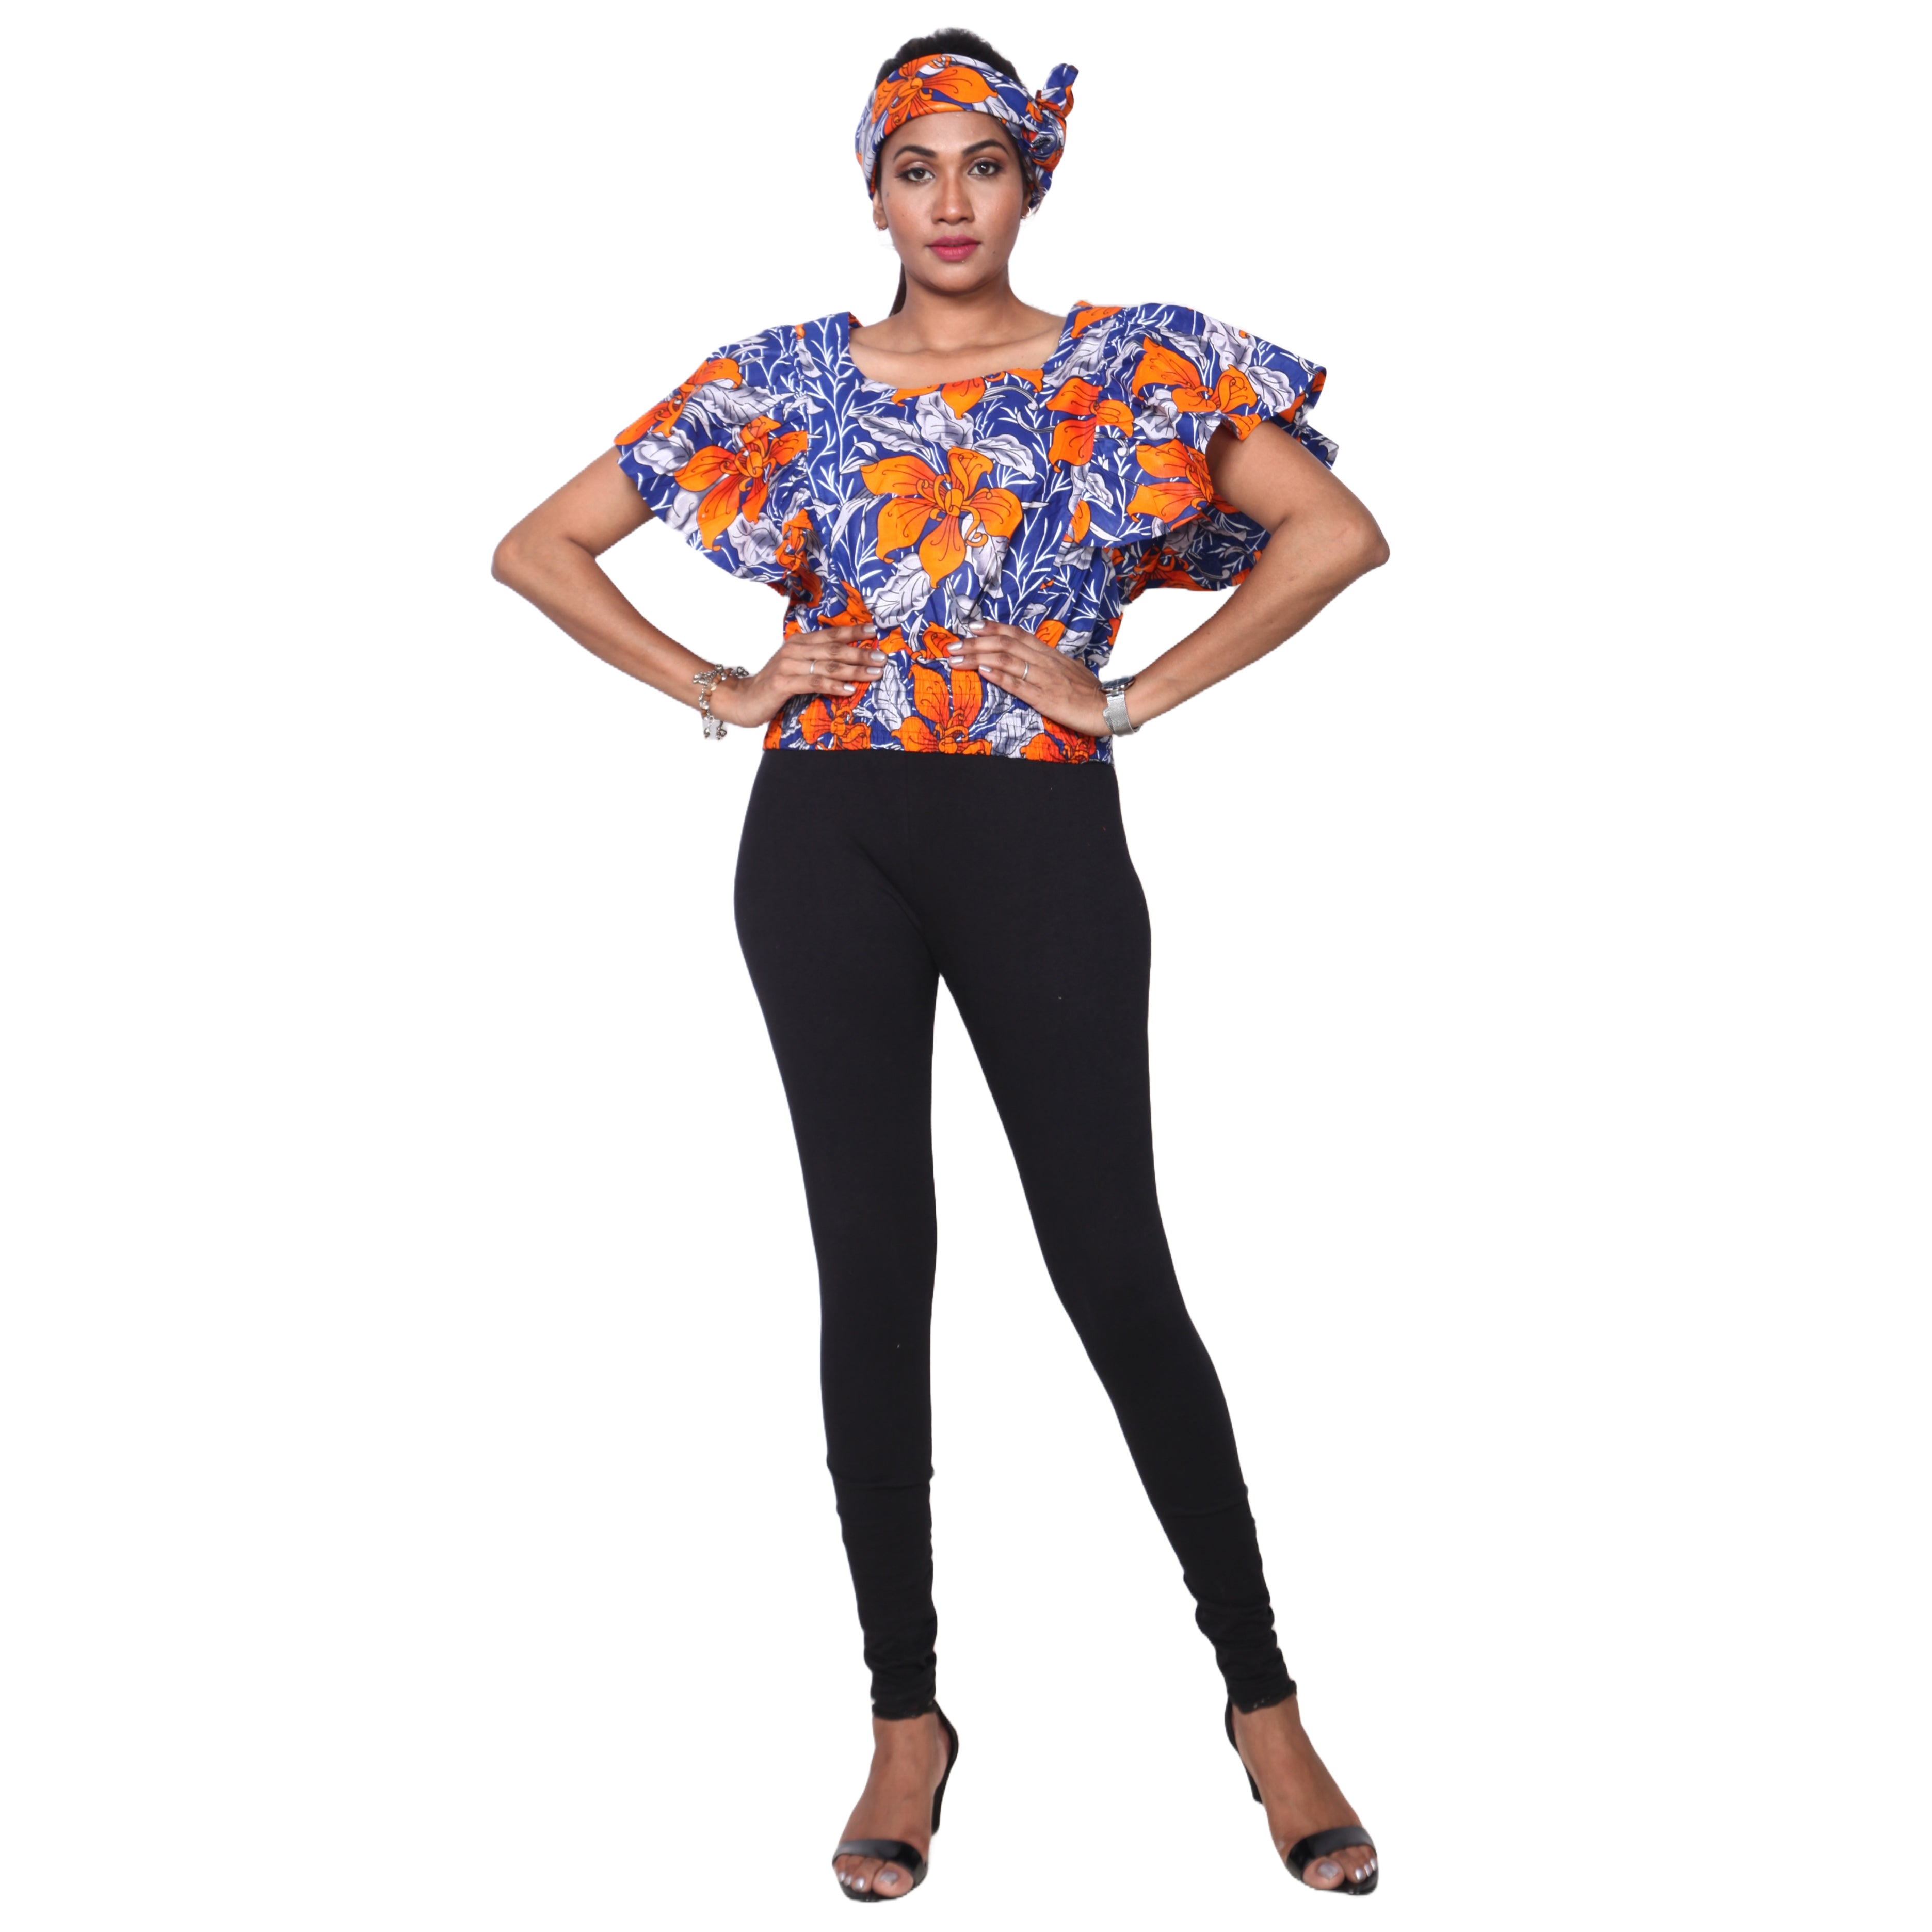 Women's African Print Short Sleeve Top blue, orange, and white 